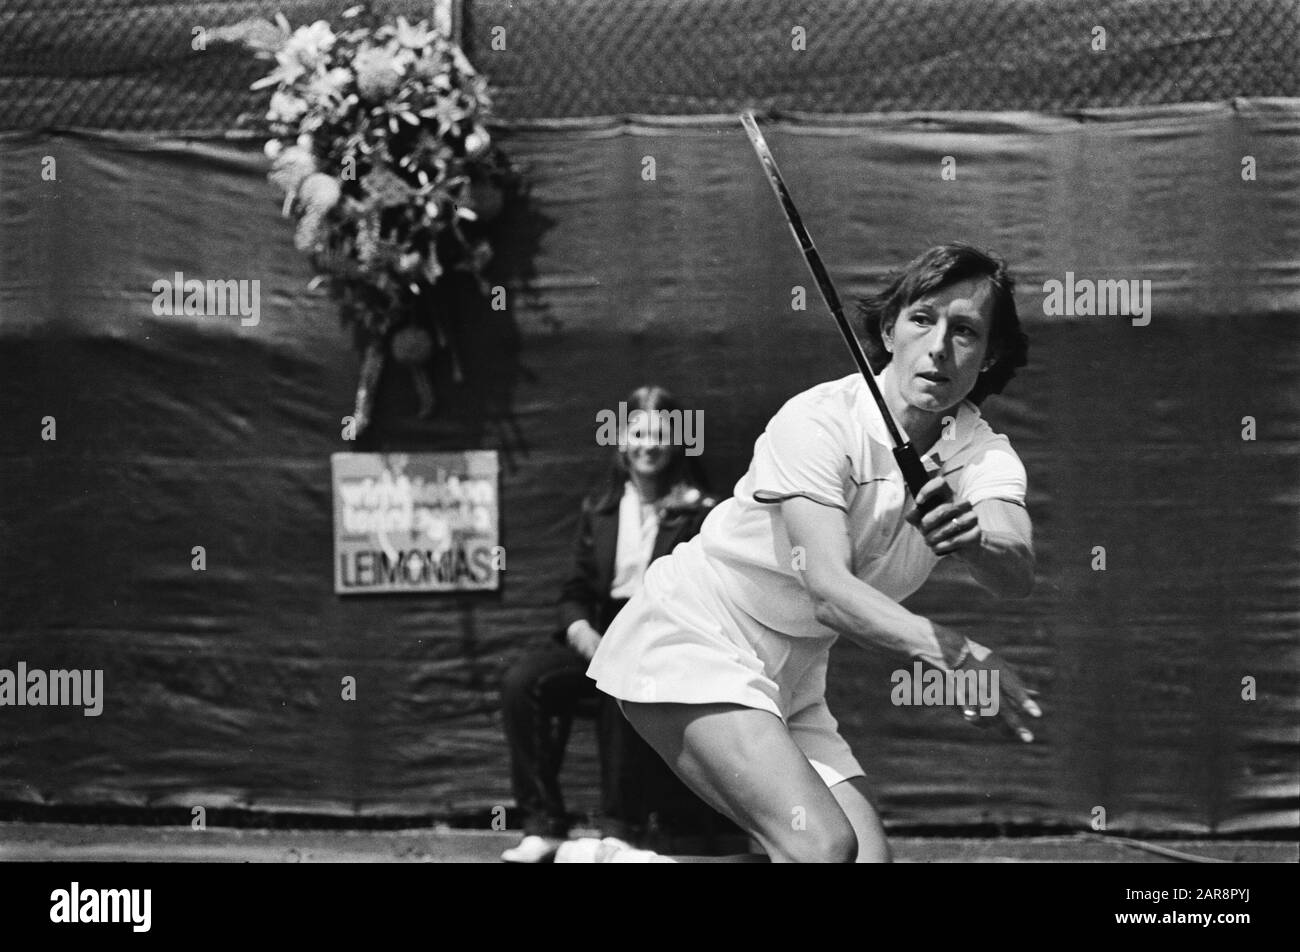 Tennis: Netherlands versus United States in The Hague; Navratilova in action Date: 6 July 1980 Location: The Hague, Zuid-Holland Keywords: tennis Stock Photo